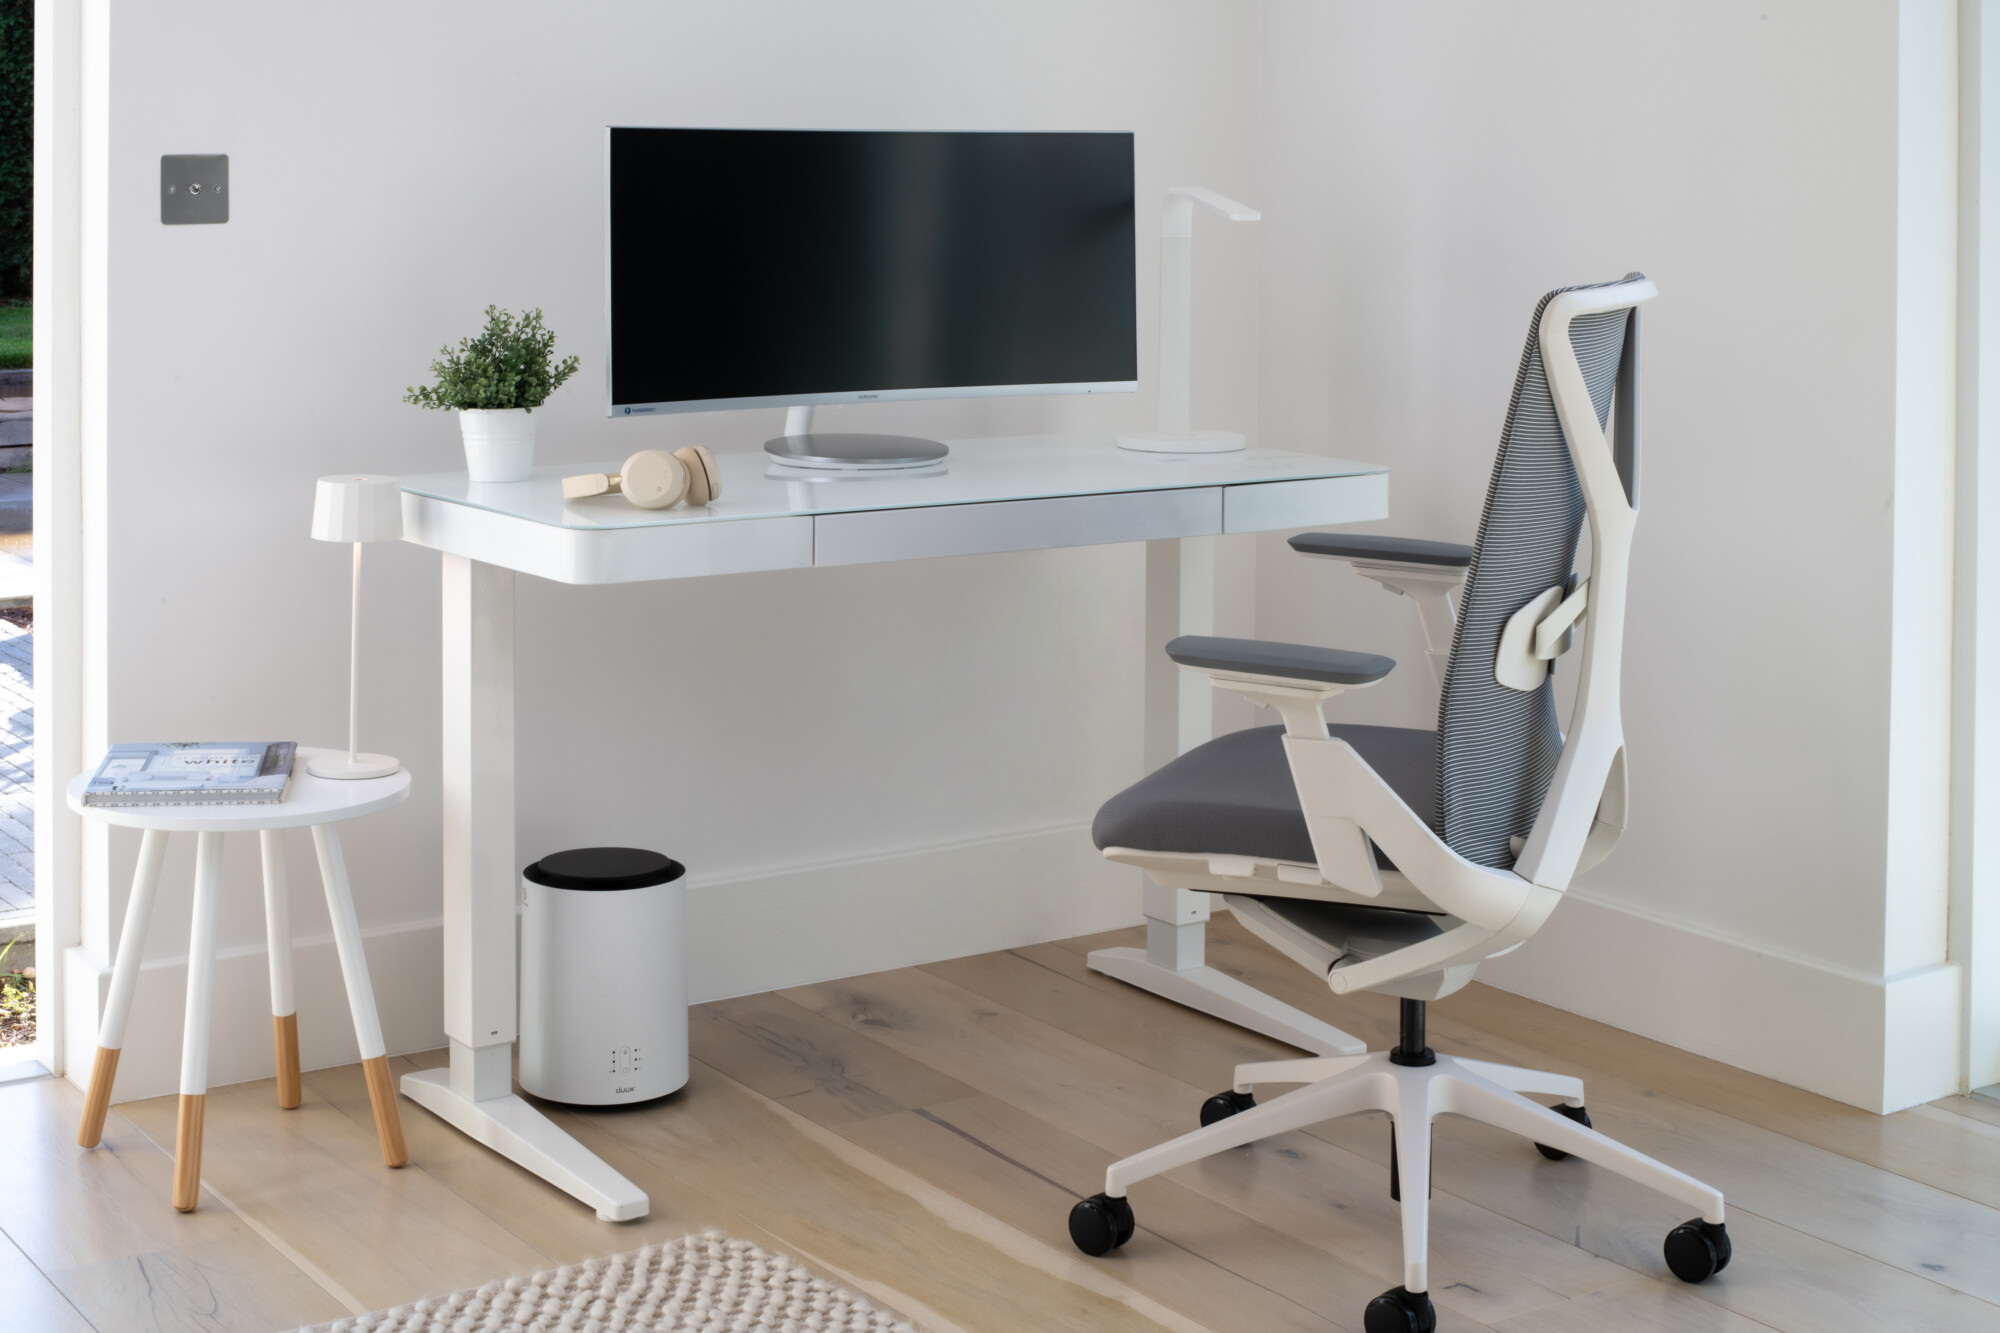 working from home tip 4 - create a dedicated workspace